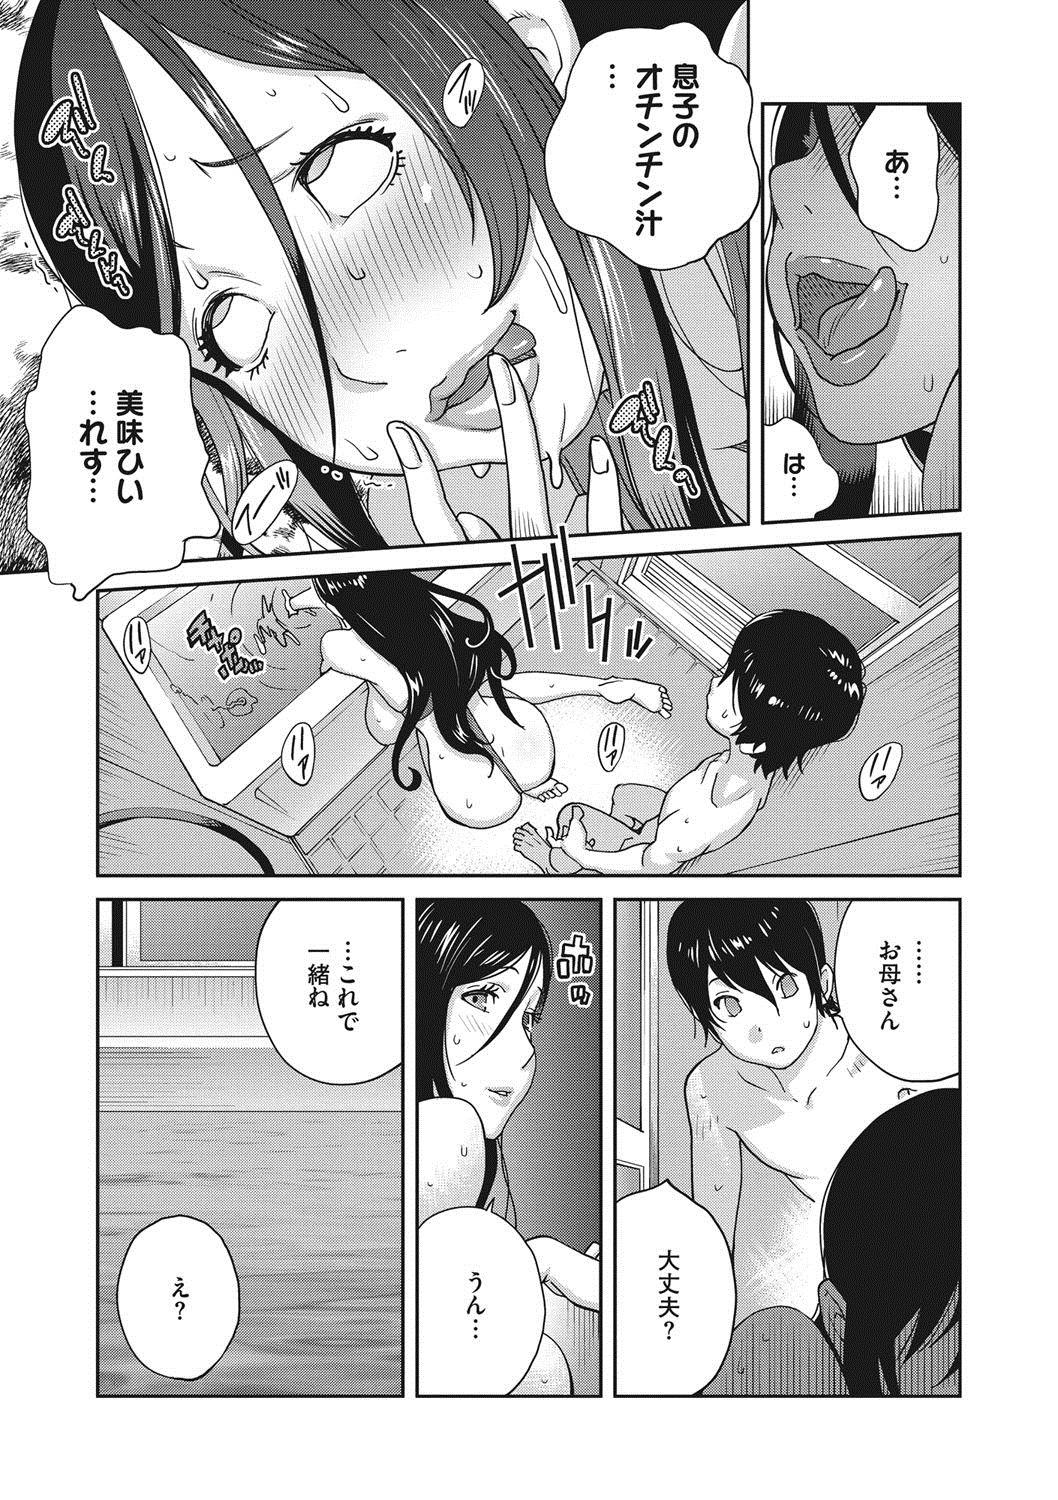 [Kotoyoshi Yumisuke] Haha to Ane to Aoi Ichigo no Fromage - Fromage of mother and an older sister and a blue strawberry Ch. 1-4 38